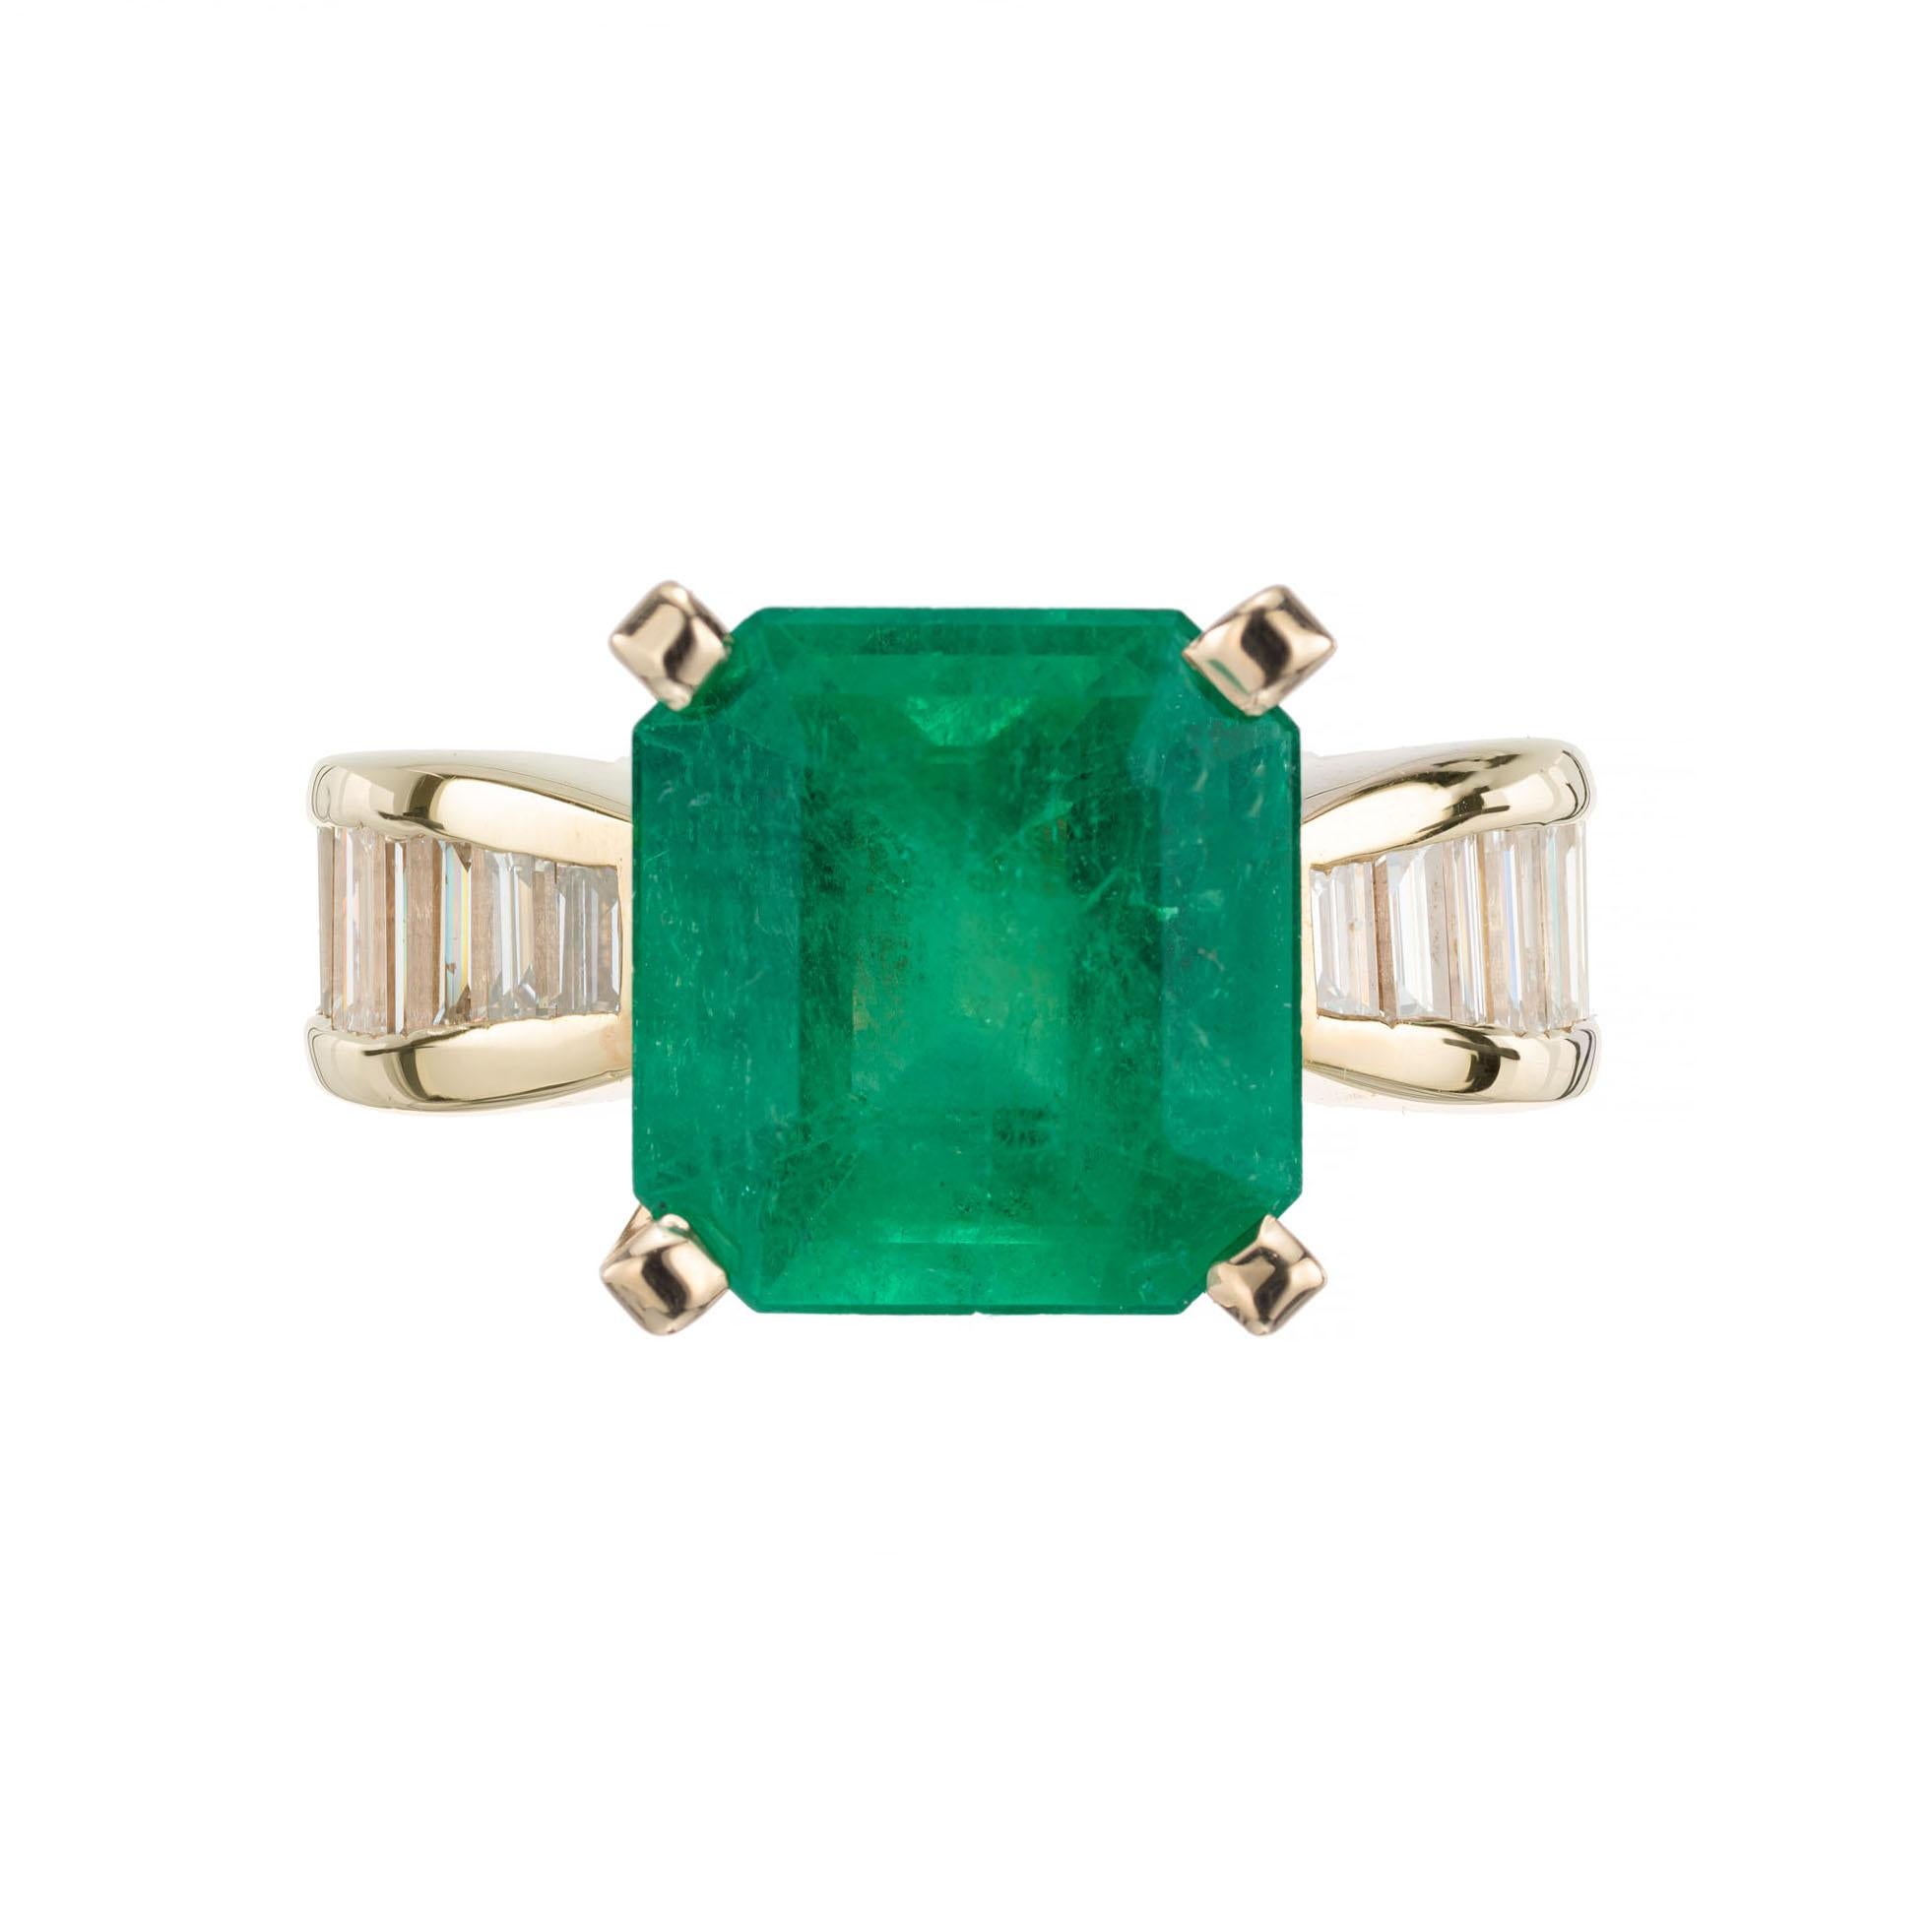 GIA certified natural emerald cut 4.52ct emerald. Moderate F2 clarity enhancement only. The emerald is circa 1950-1960. The ring was designed to show off the wispy Colombian color of the stone by the Peter Suchy Workshop 

1 octagonal cur green MI